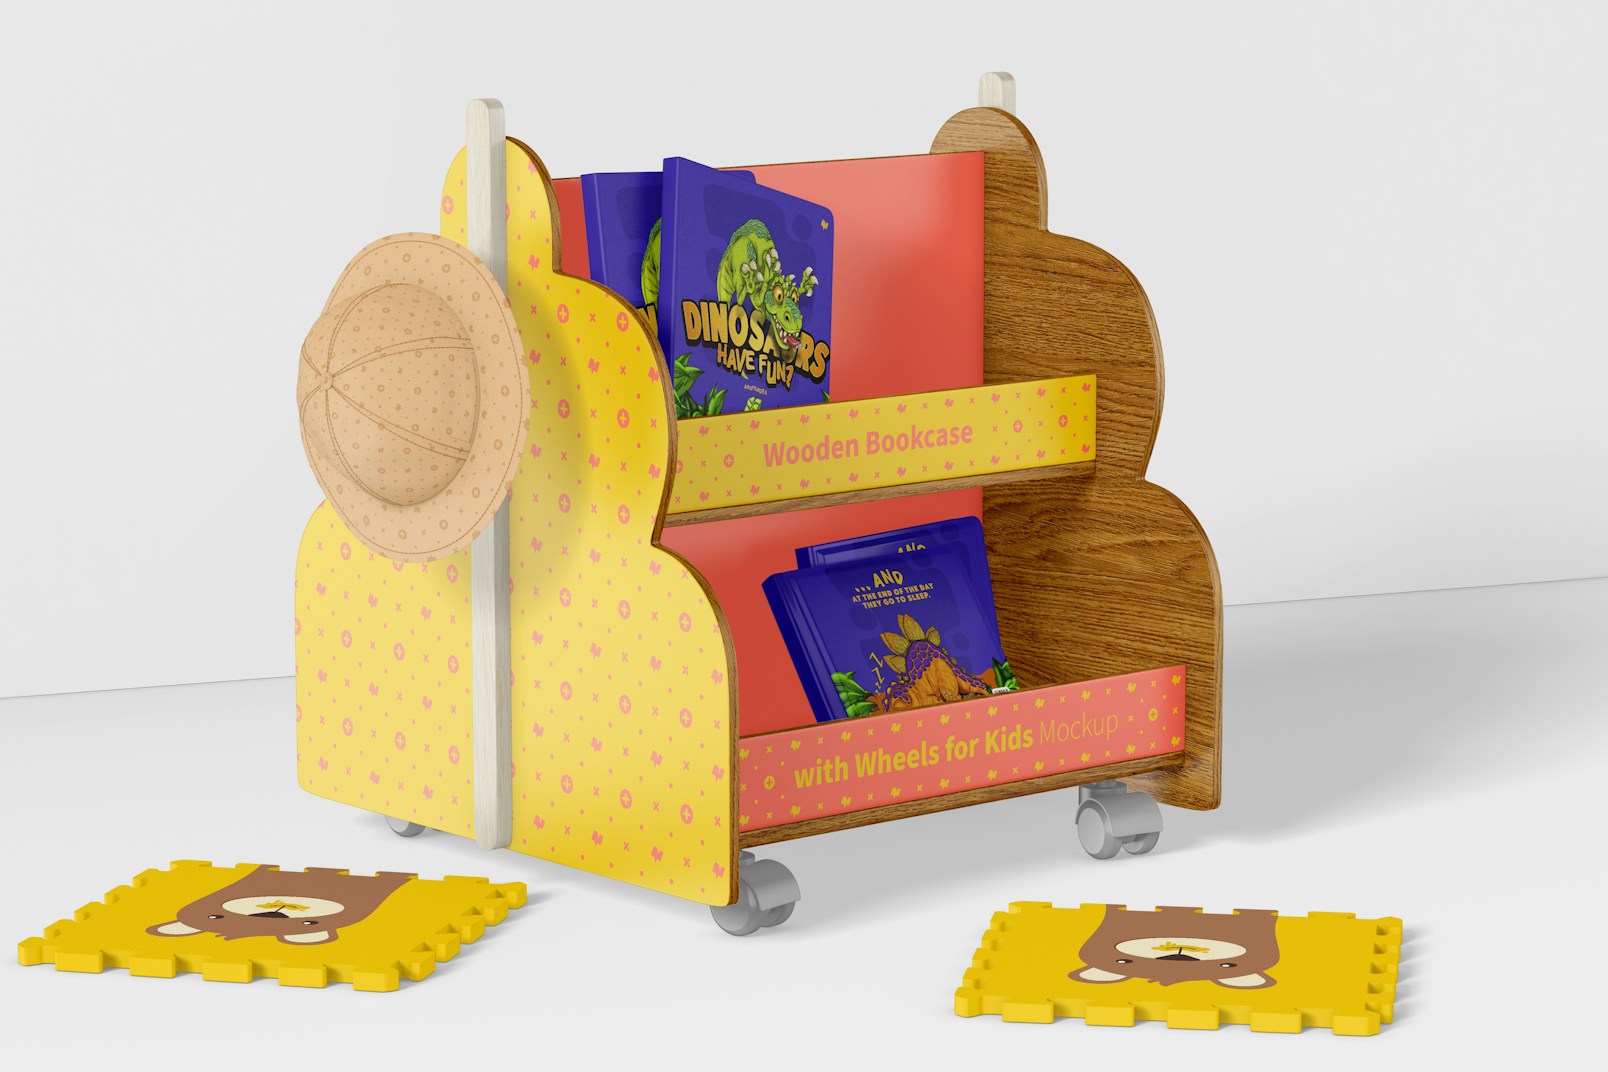 Wooden Bookcase with Wheels for Kids Mockup, Left View